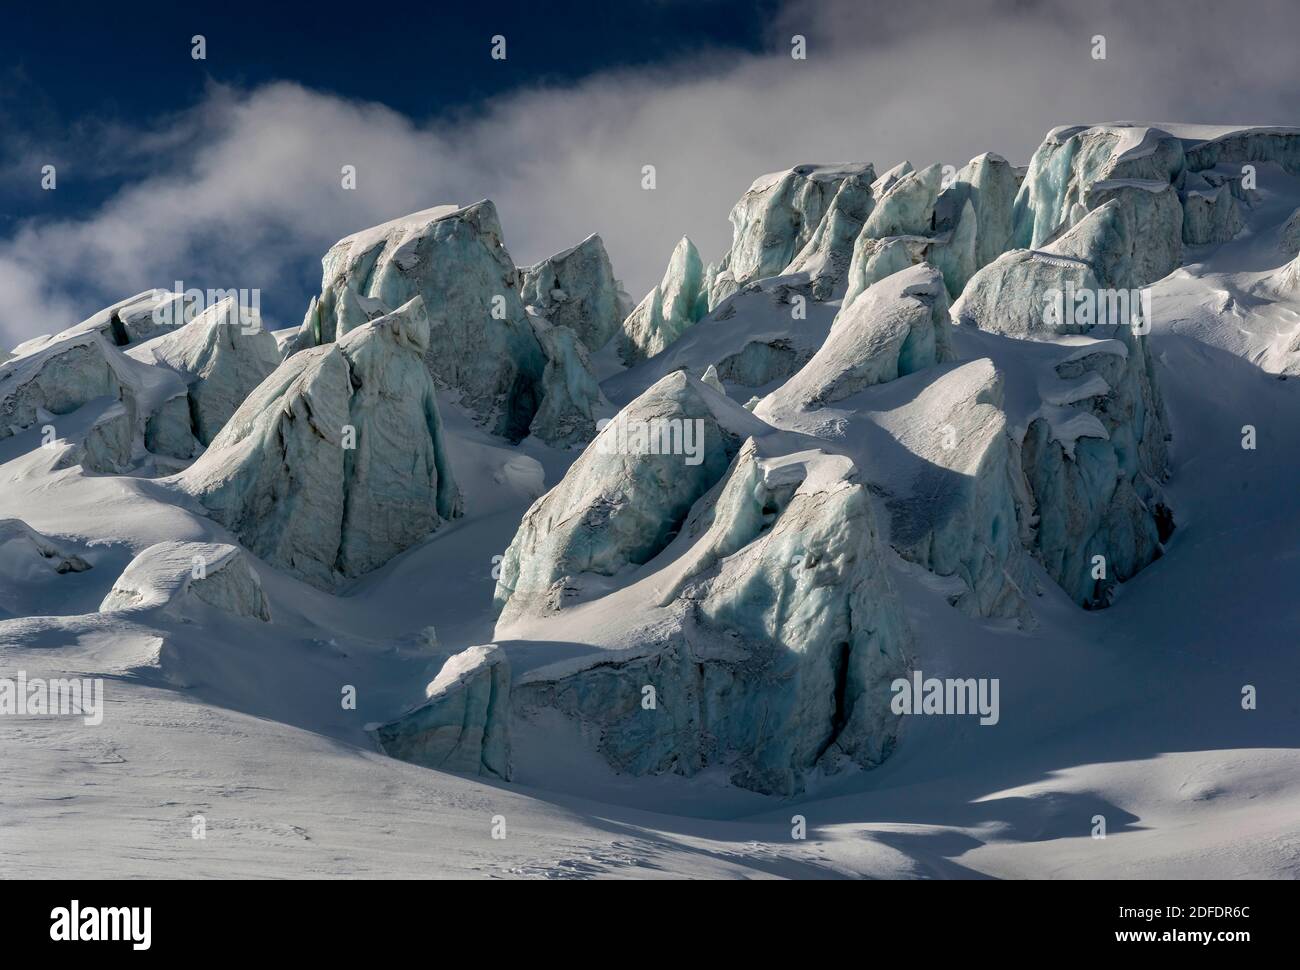 Awesome views from Allalin Glacier Switzerland Stock Photo